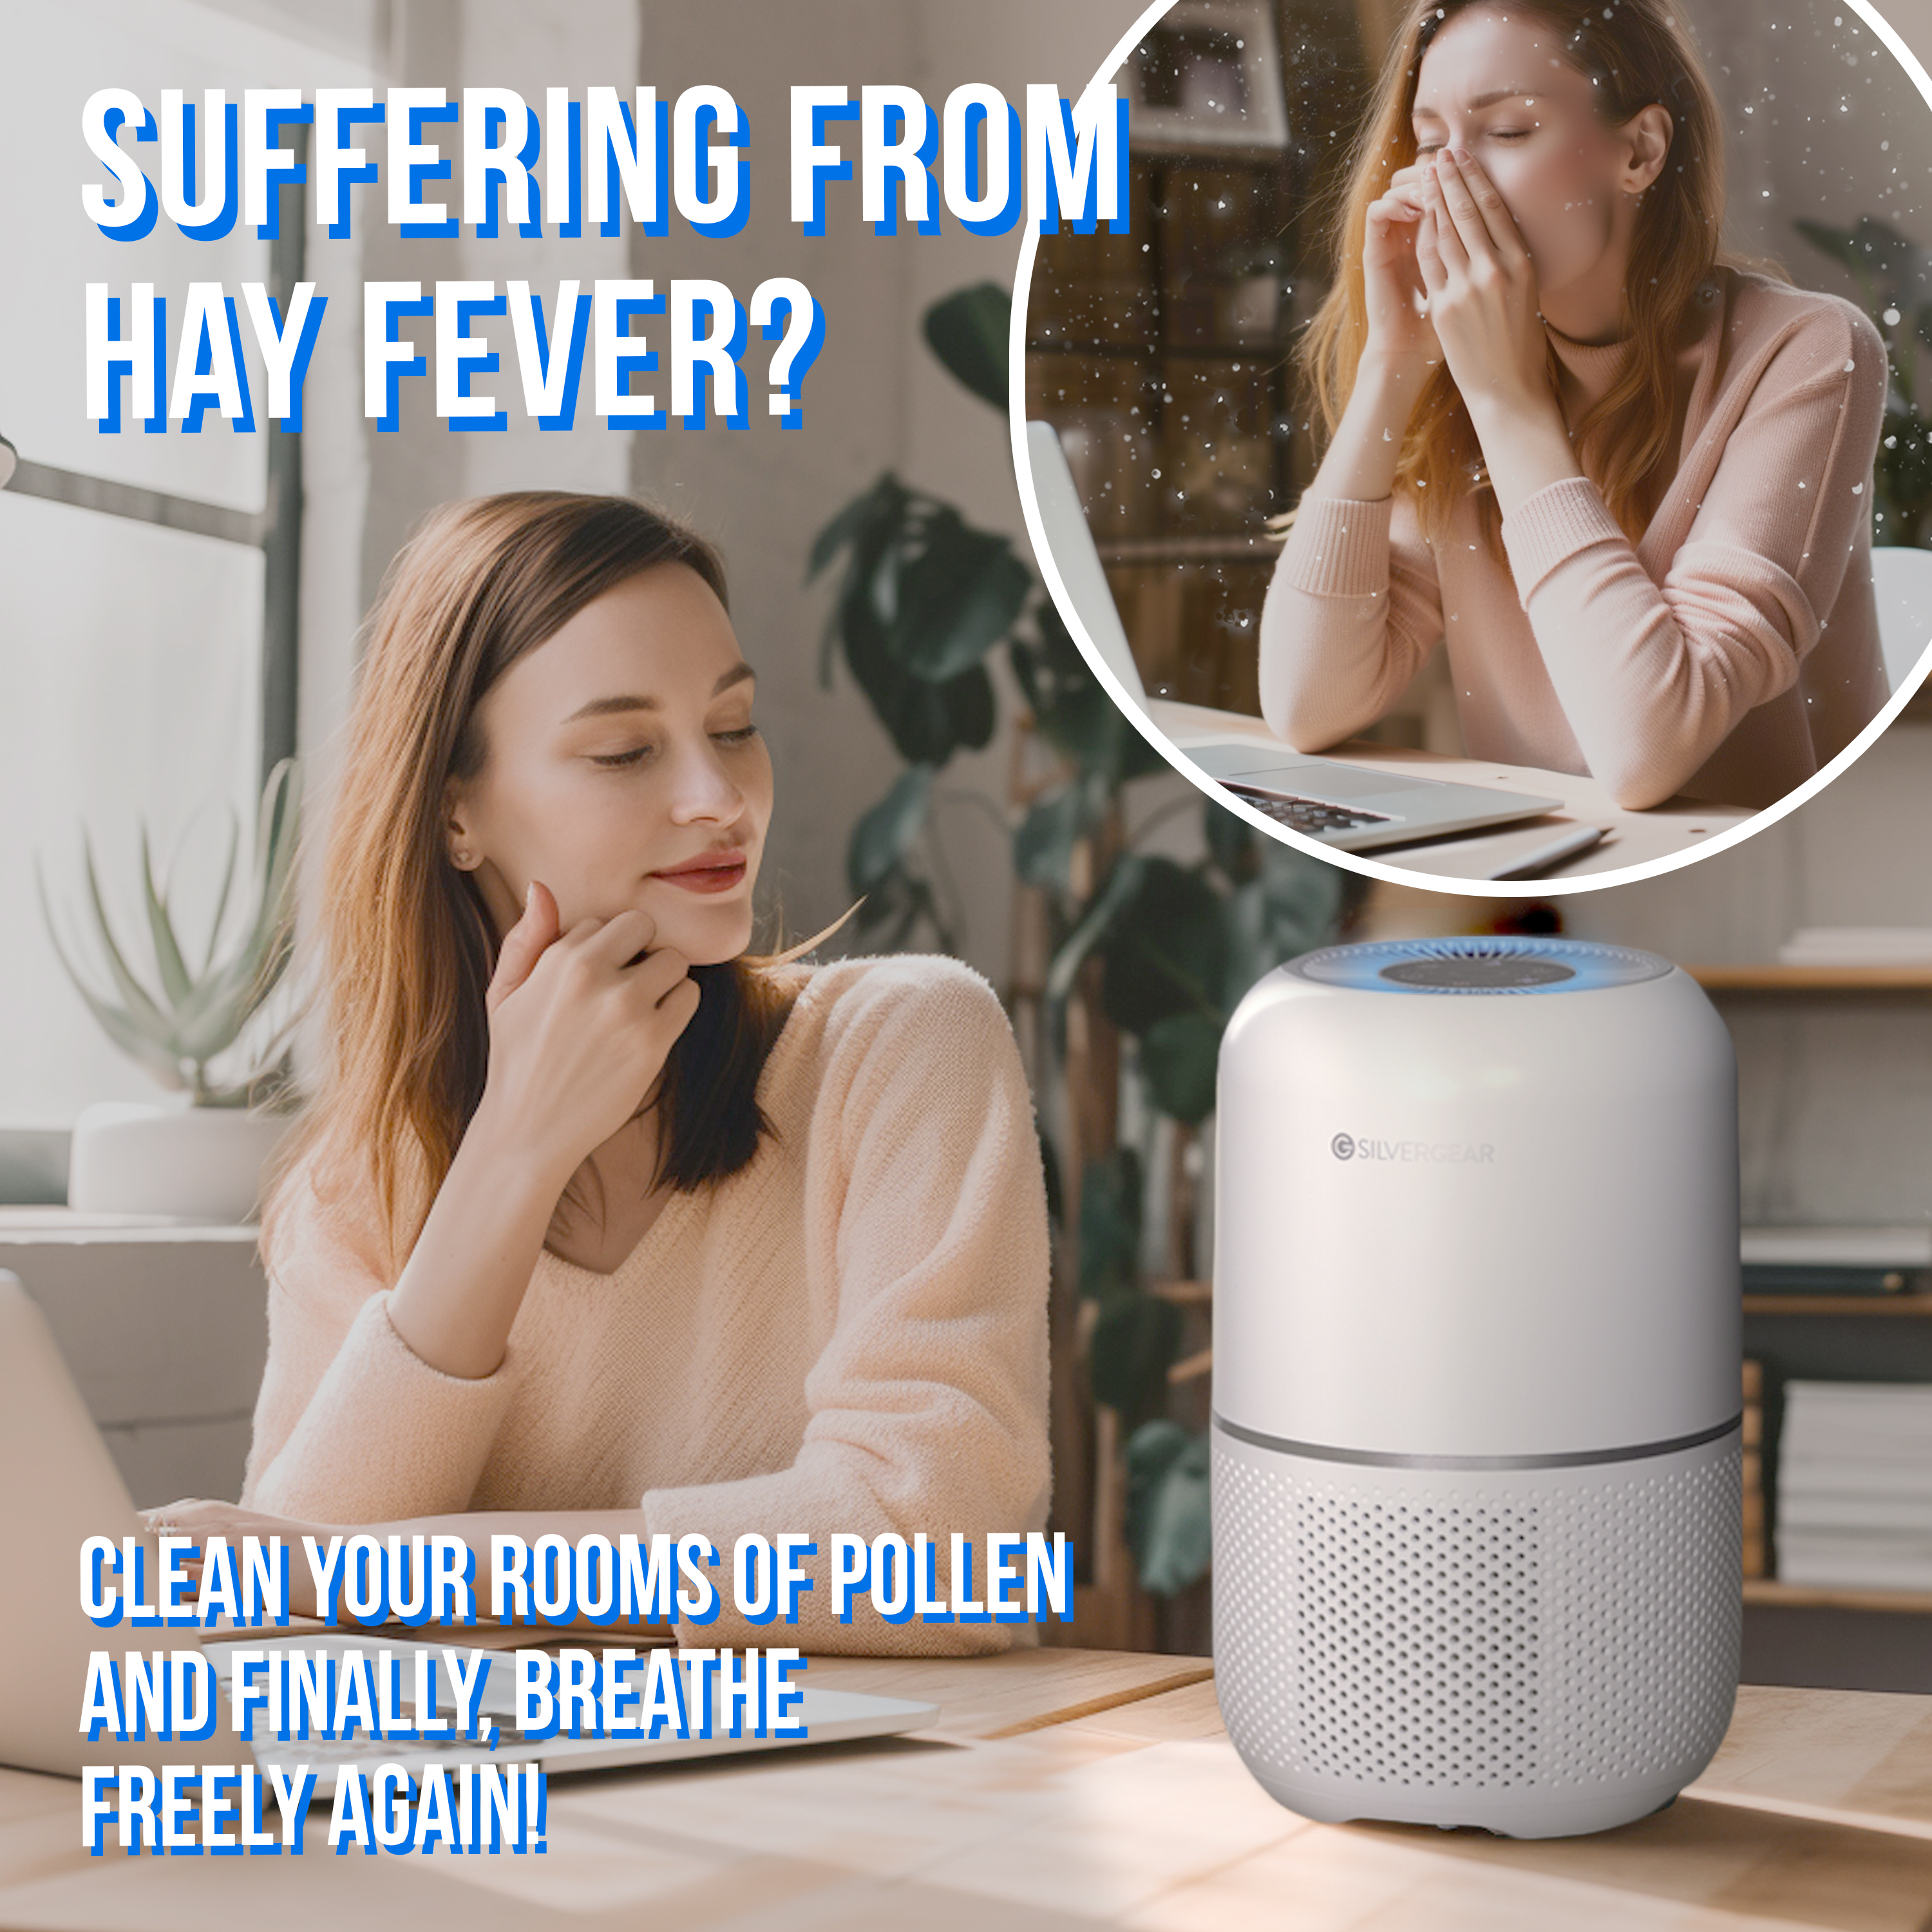 Hay fever, asthma and allergy